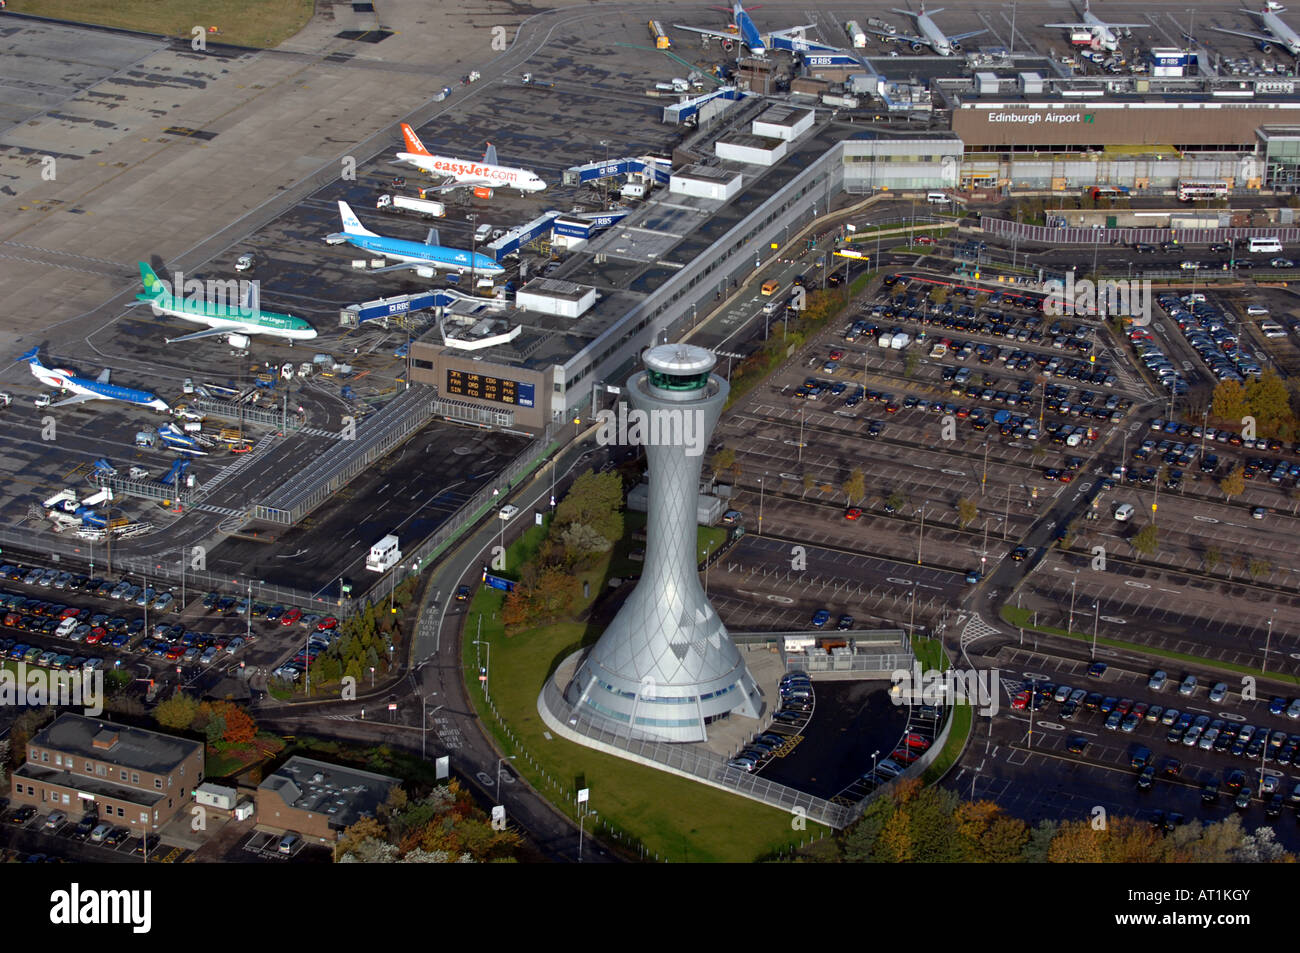 Aerial view of Edinburgh Airport, runway and control tower Stock Photo